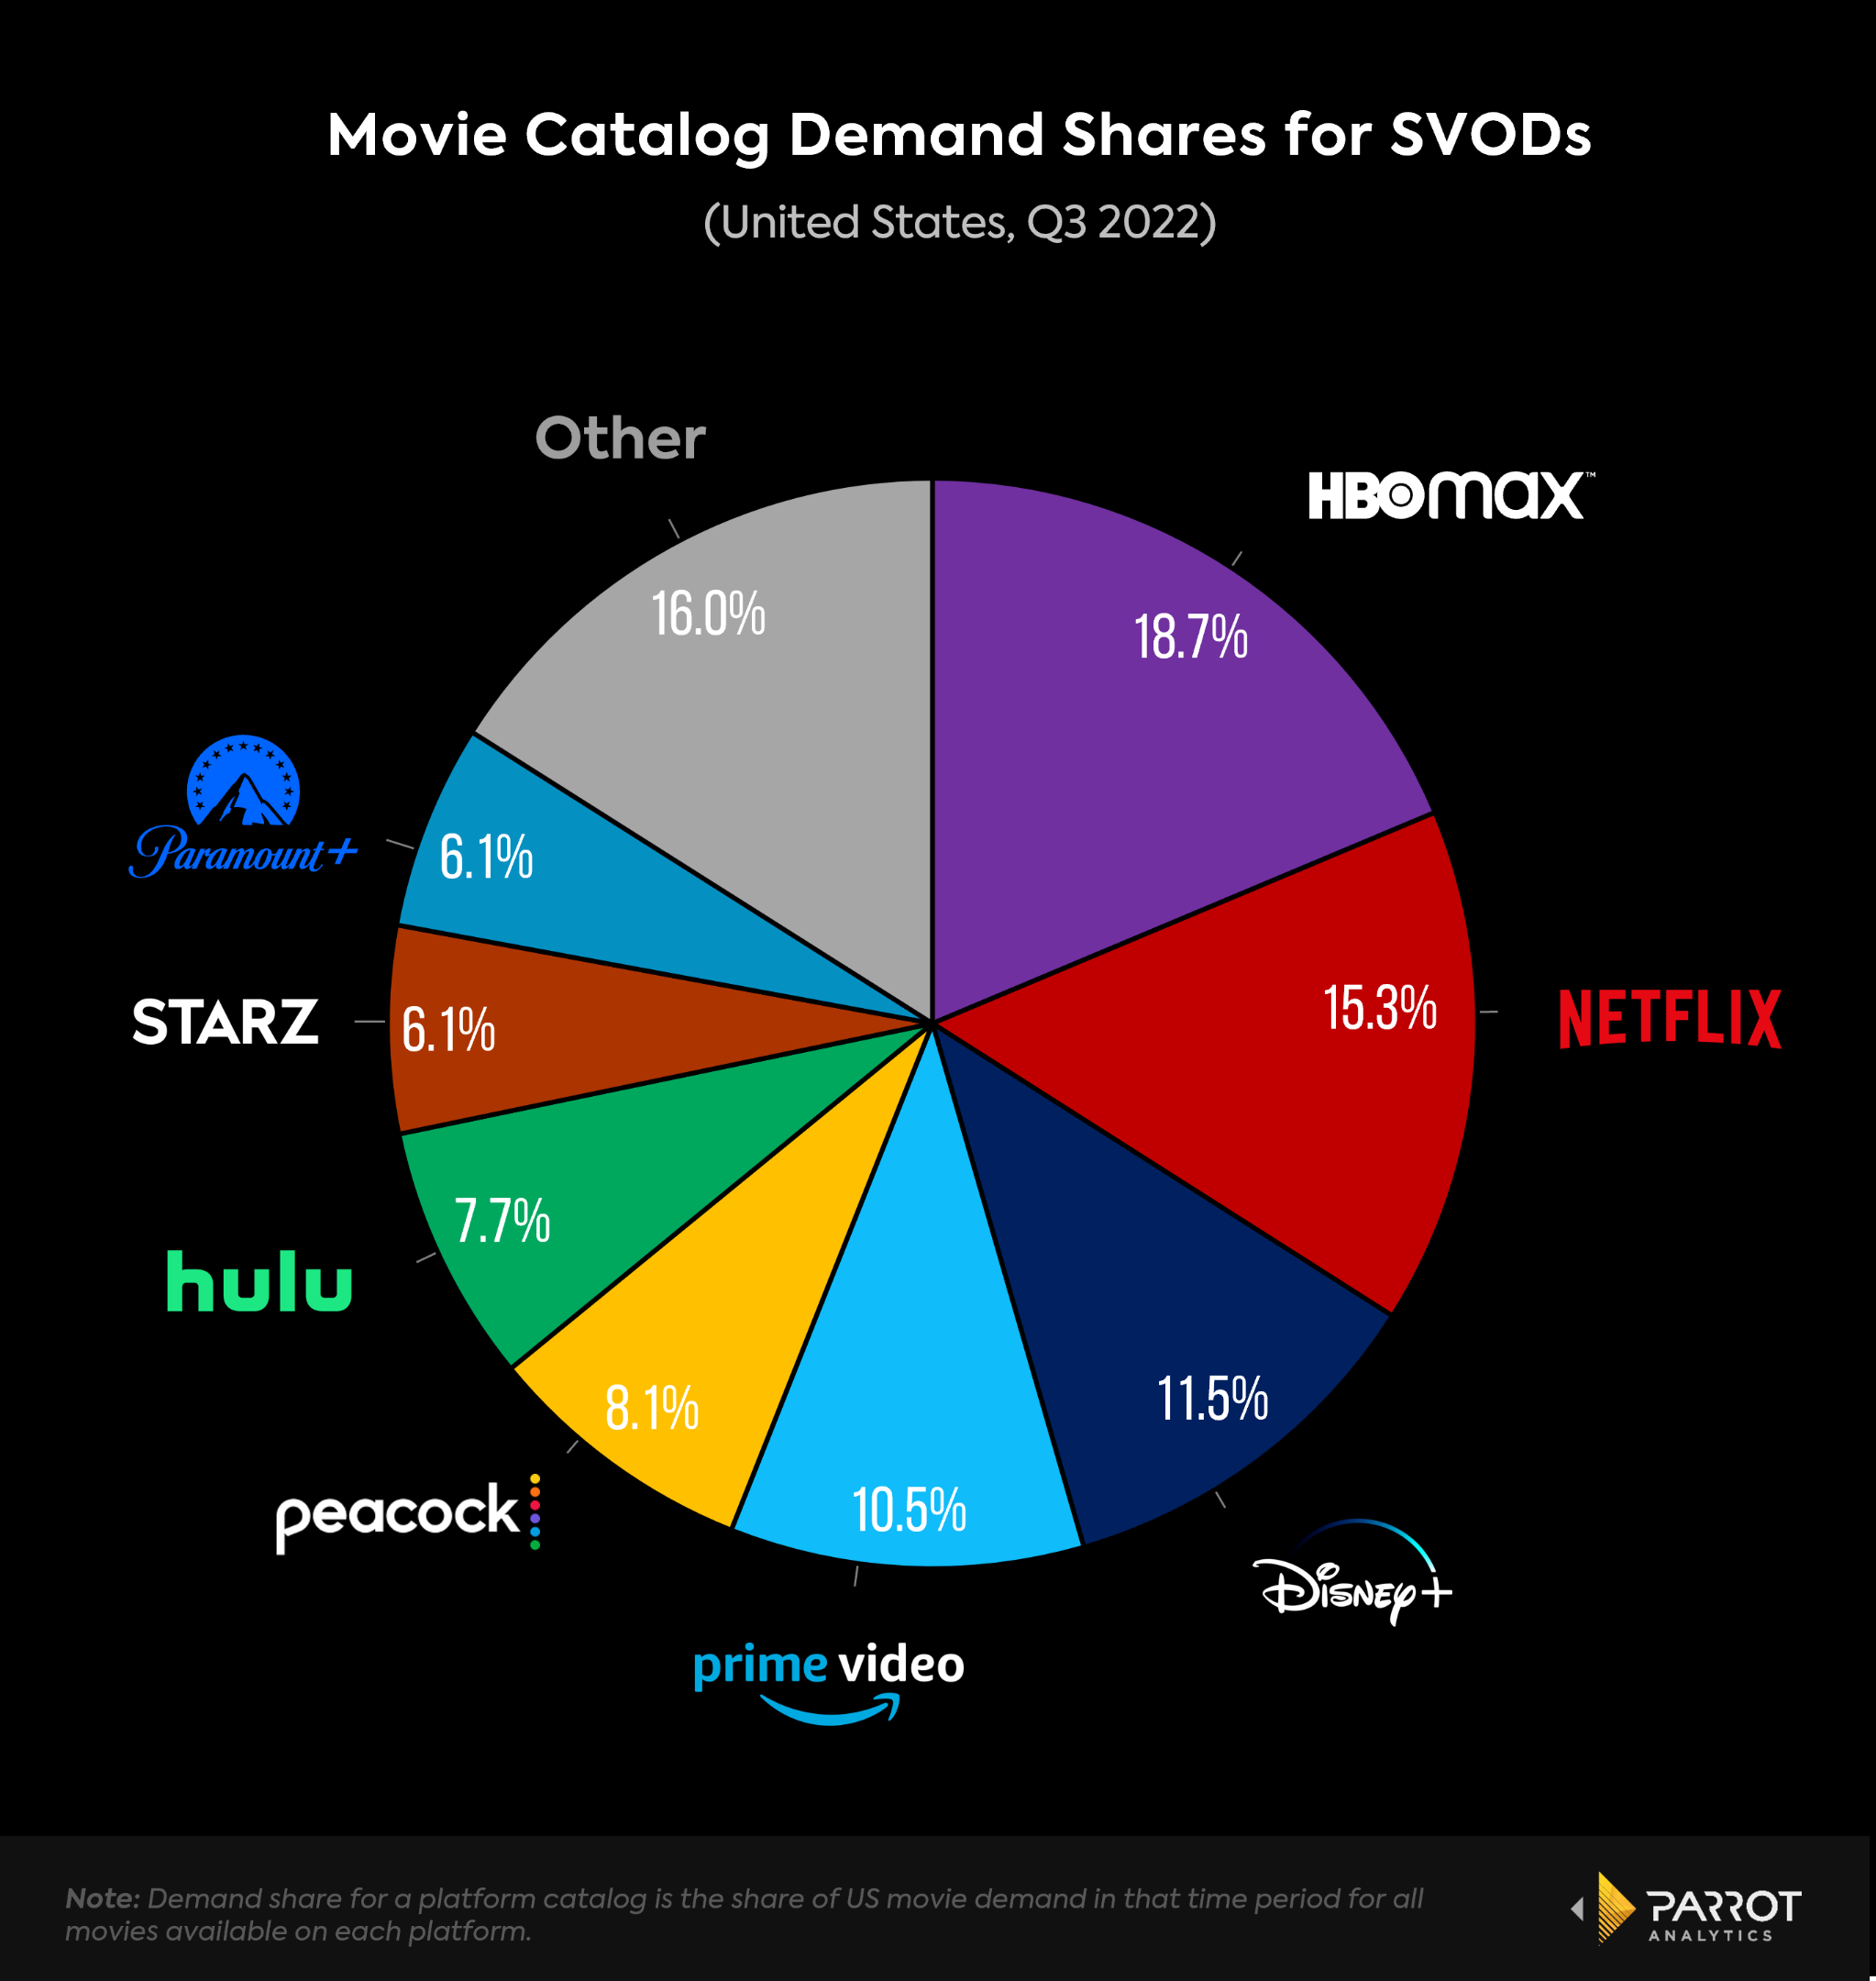 A pie chart showing the share of movies on demand among the world's largest streaming services for Q3 2022